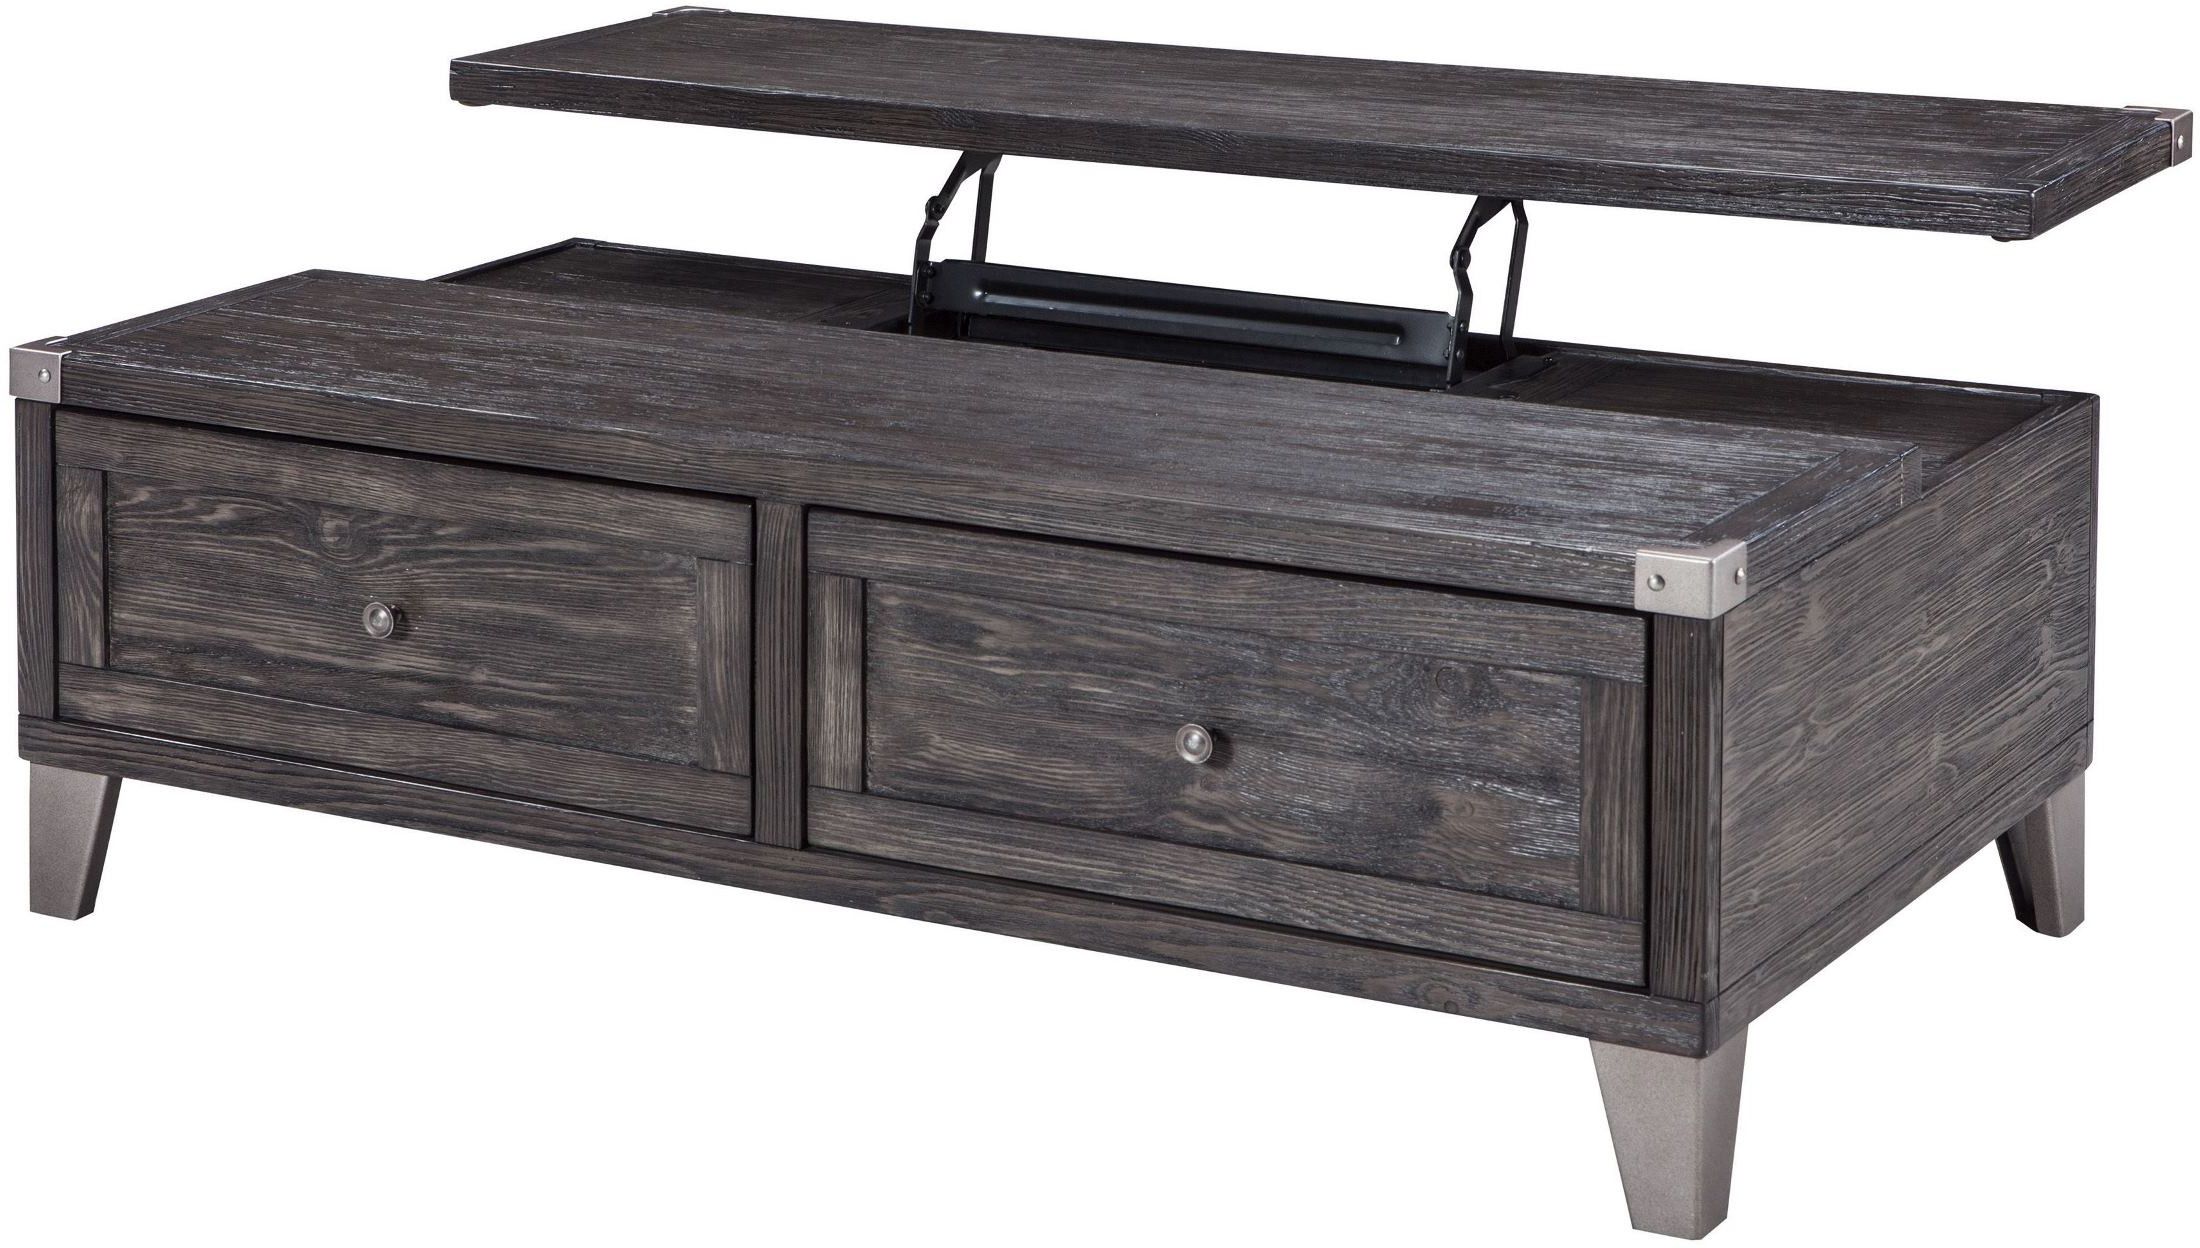 Todoe Dark Gray Lift Top Cocktail Table From Ashley | Coleman Furniture Within Gray Coastal Cocktail Tables (View 6 of 20)